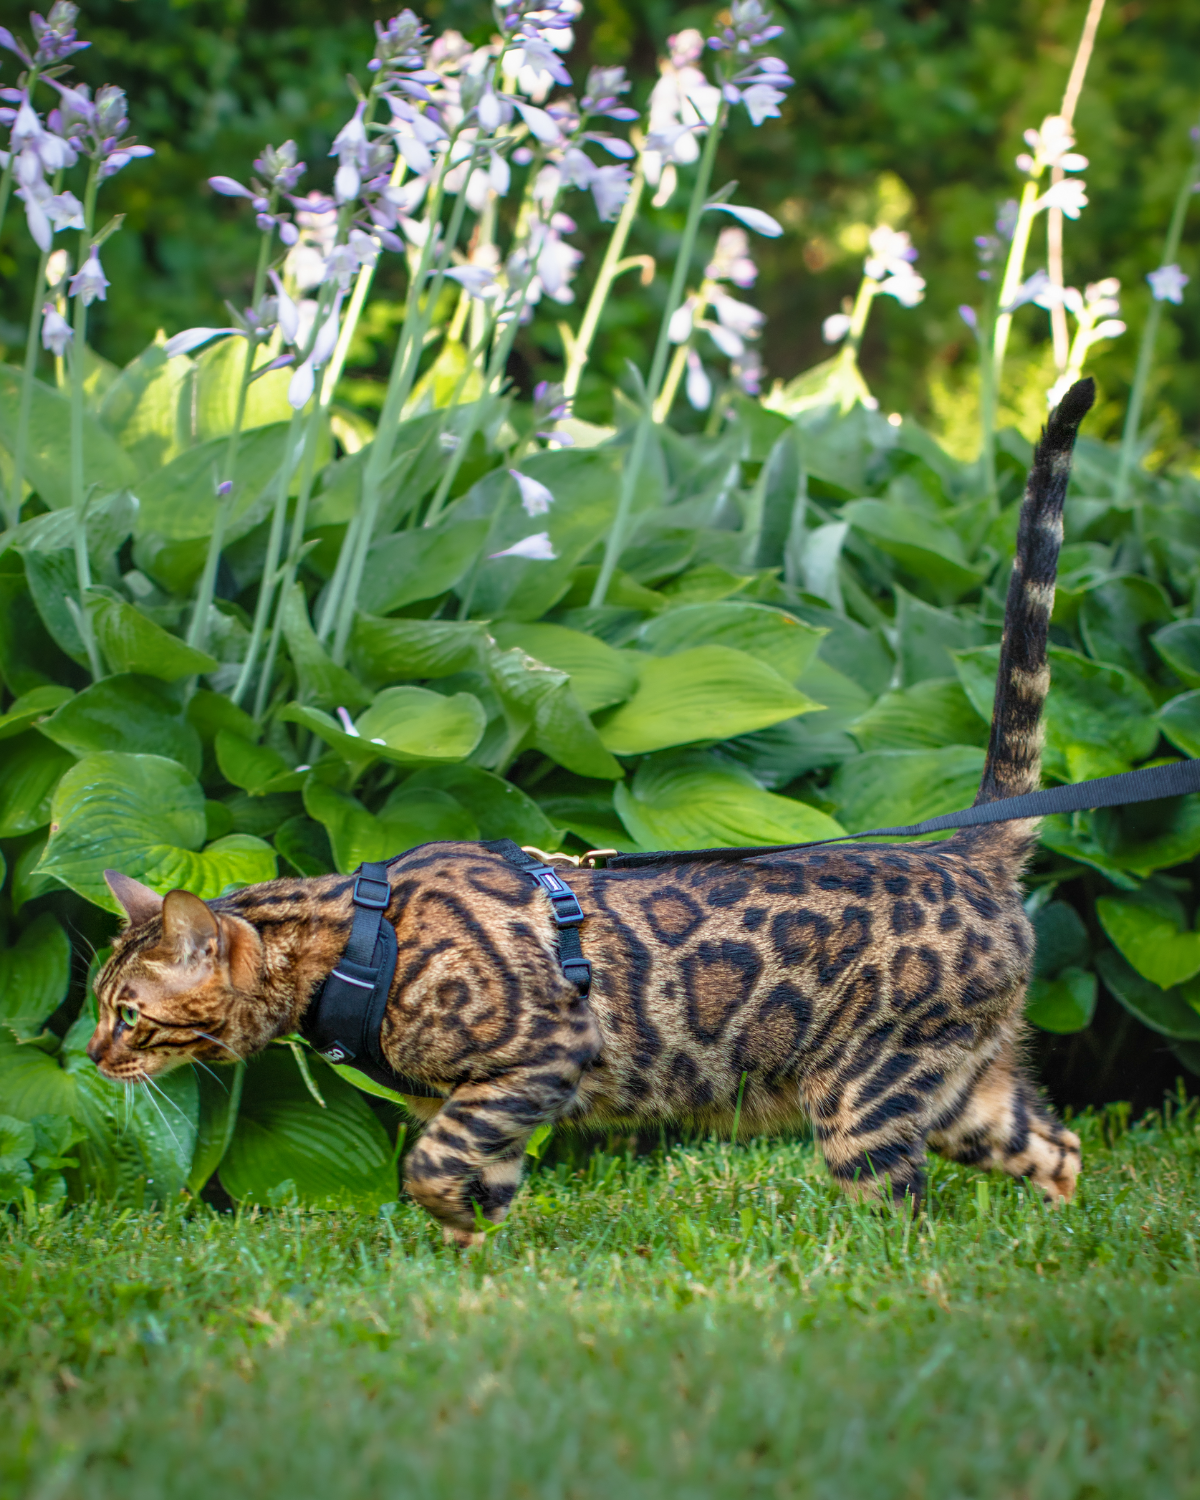 DJANGO travel cat harnesses have a lightweight body and soft frame that sits incredibly comfortably against cats' bodies while providing support for any outdoor adventure - djangobrand.com